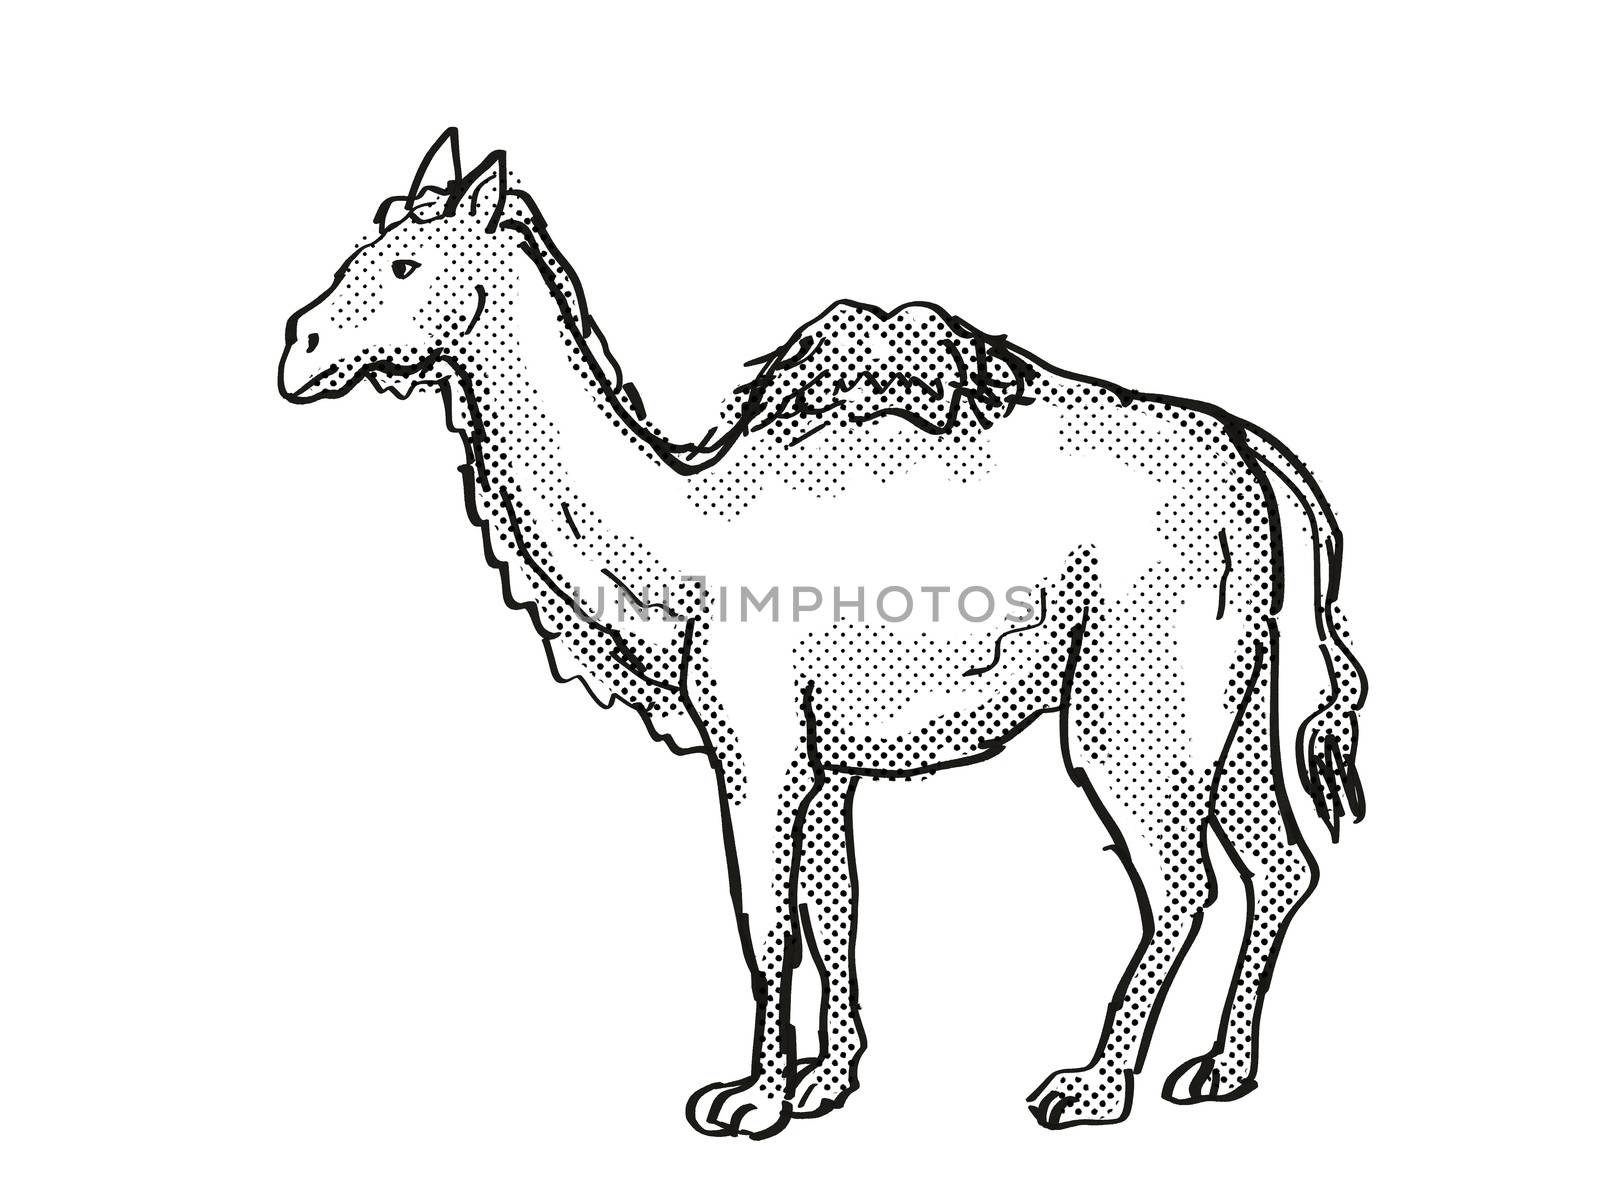 Retro cartoon style drawing of a Western Camel, an extinct North American wildlife species on isolated background done in black and white full body.